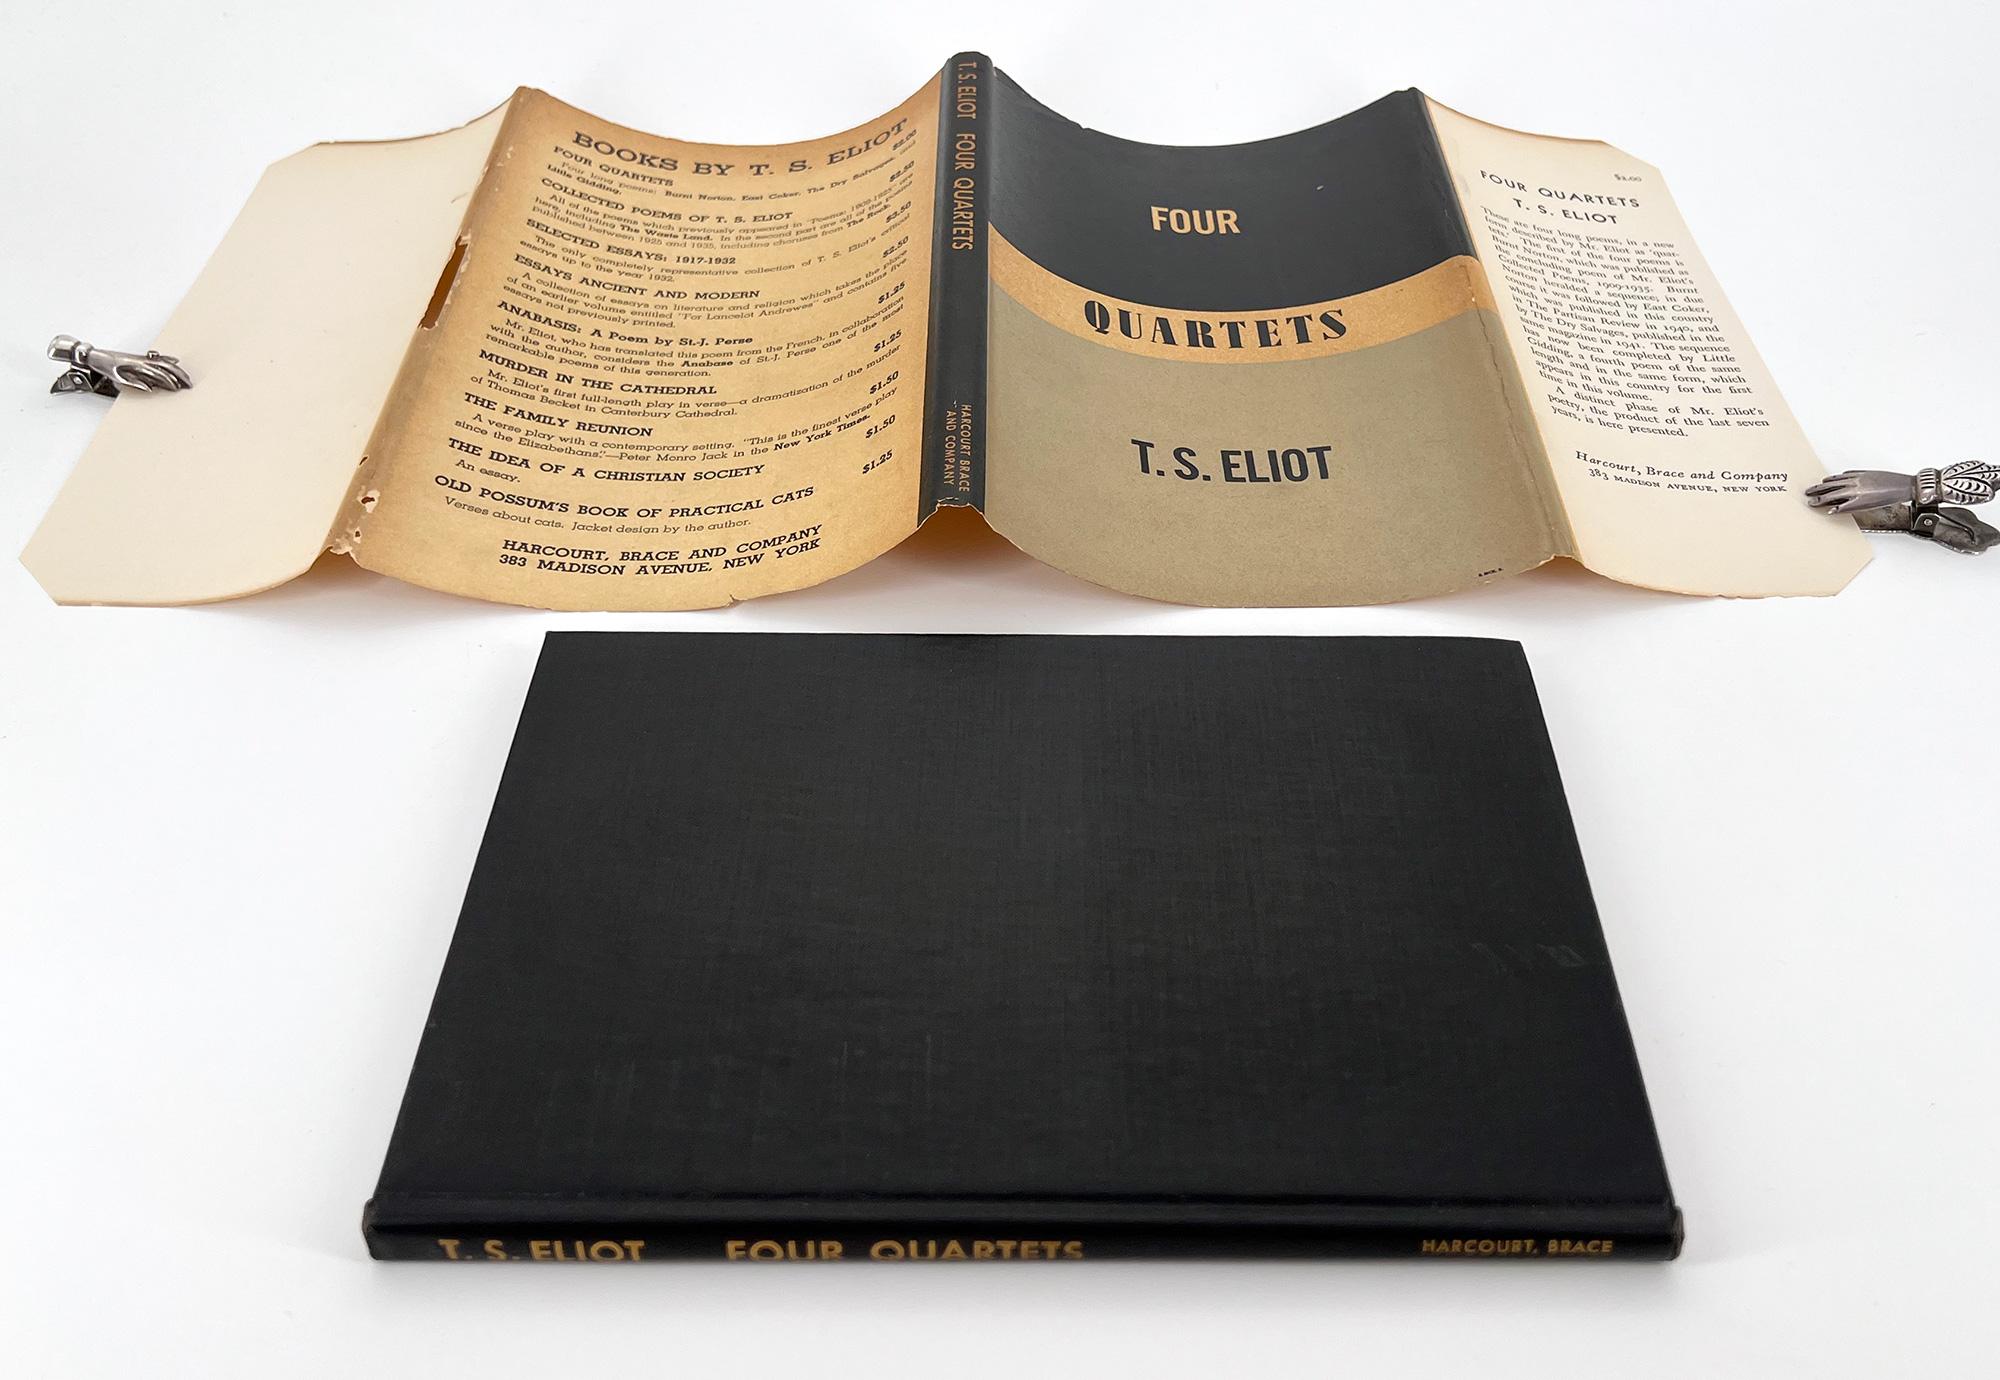 First Edition, first impression.  New York: Harcourt, Brace and Company, 1943. 

8vo, 8 1/2 x 5 1/2 inches (215 x 139 mm). vii + 39 [3]. Black cloth boards lettered in gold down the spine. White dust-jacket designed by E. McKnight Kauffer, printed